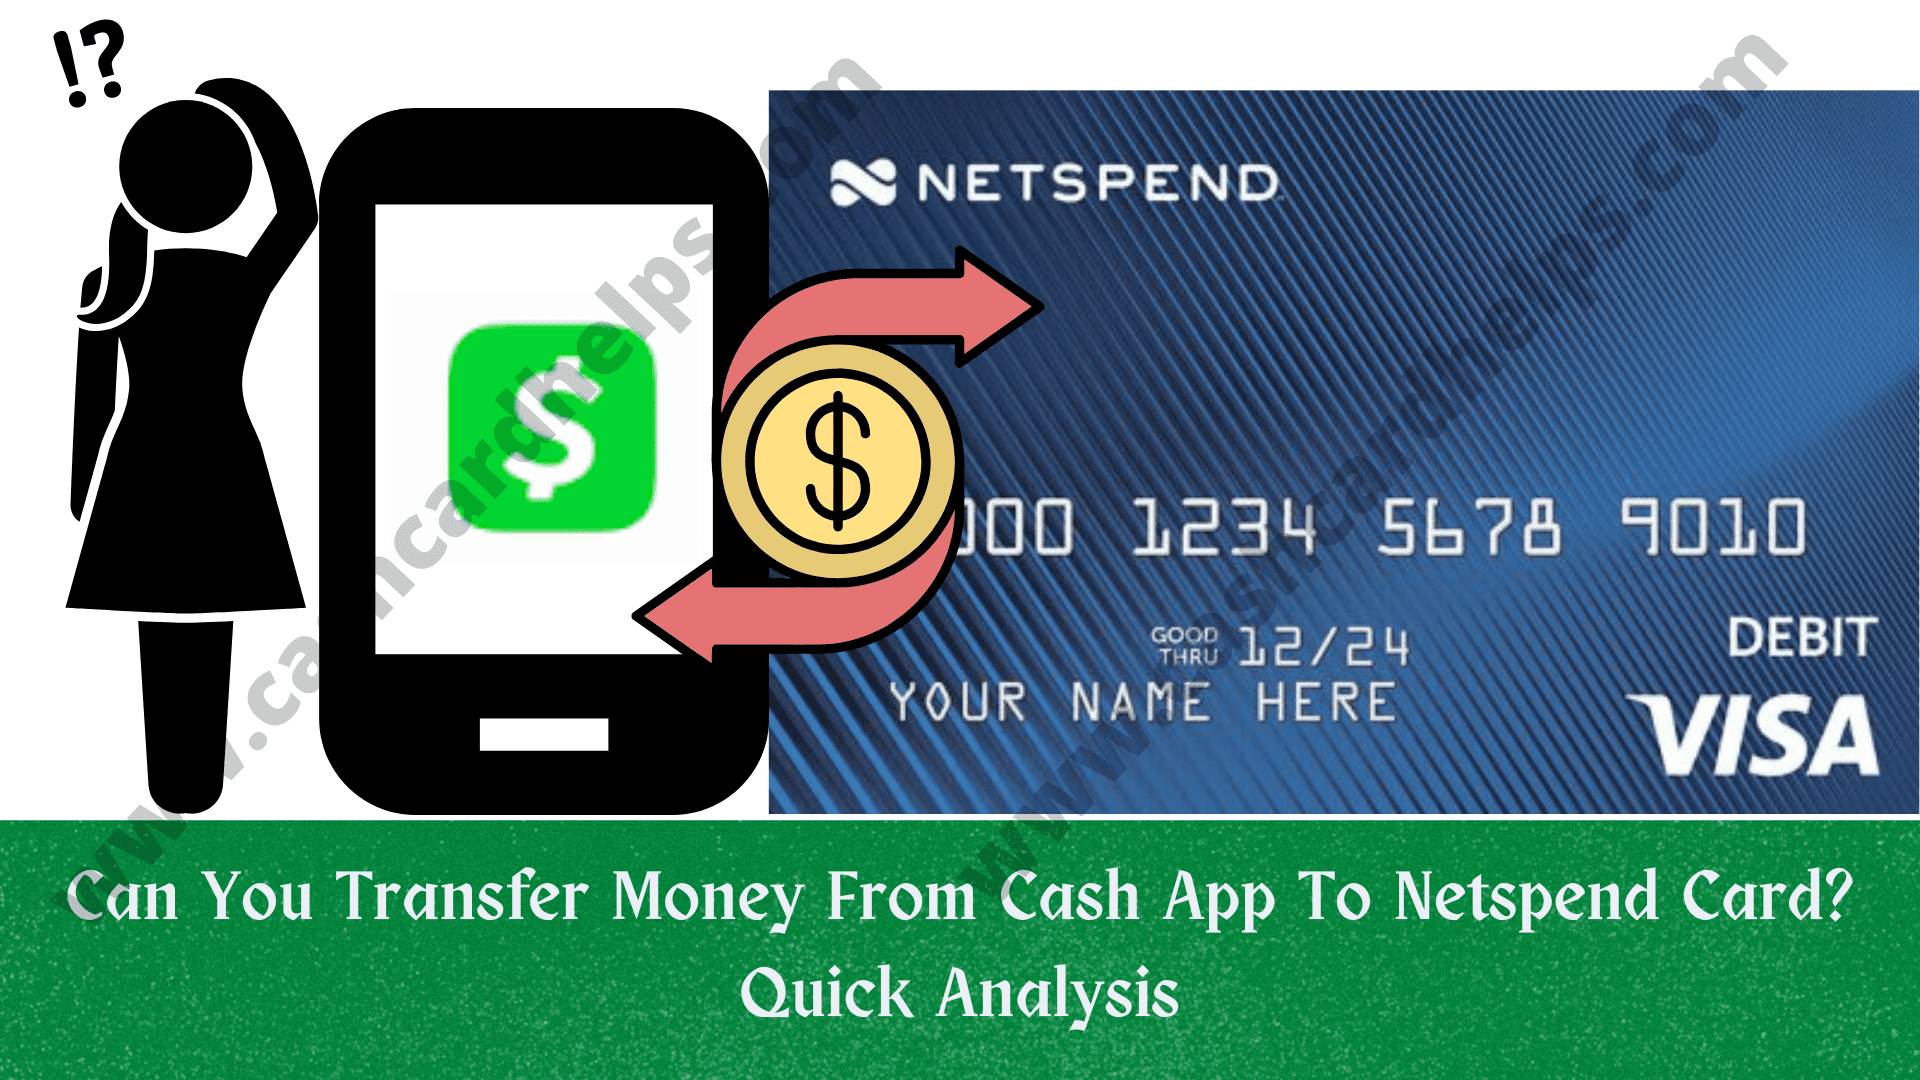 can you transfer money from cash app to netspend card